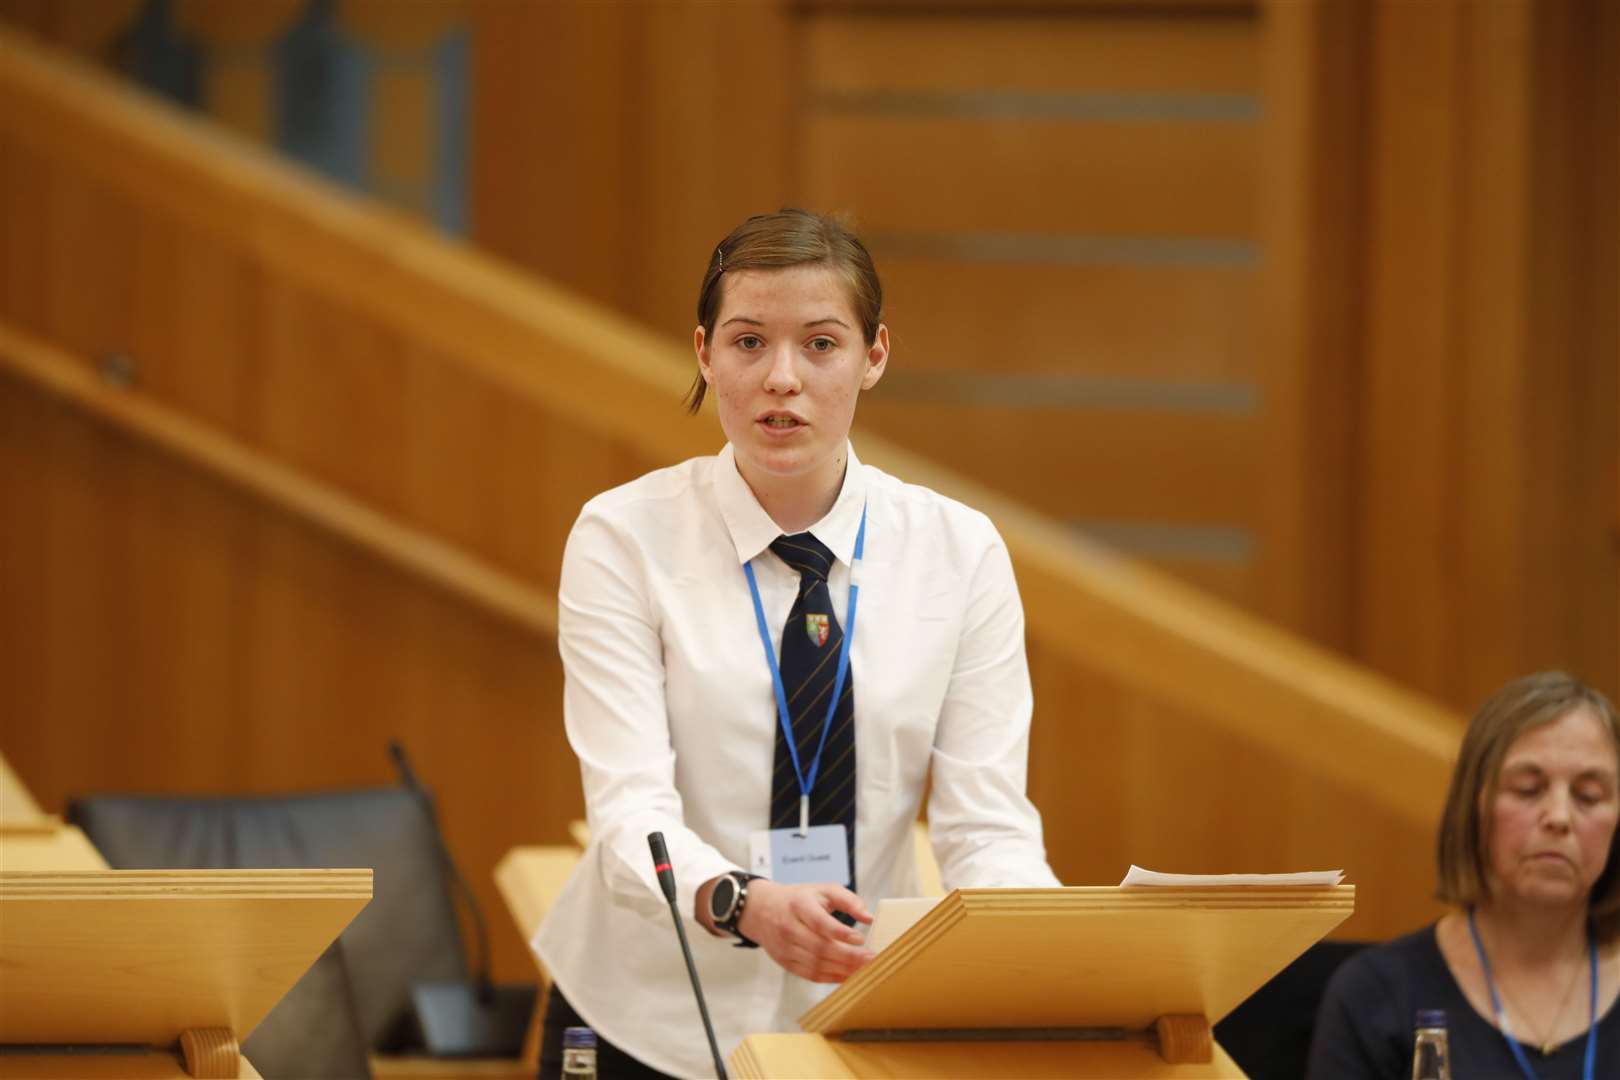 Aimee Ross, Fortrose Academy pictured during the Donald Dewar Memorial Debate final which took place in the Debating Chamber of the Scottish Parliament, Edinburgh. Teams from Fortrose Academy, Hutchesons Grammar School, High School of Glasgow and Dunfermline High School took part in the final where they debated to proposition "This House regrets the emergence of ‘cancel culture’". 09 June 2022. Pic - Andrew Cowan/Scottish Parliament